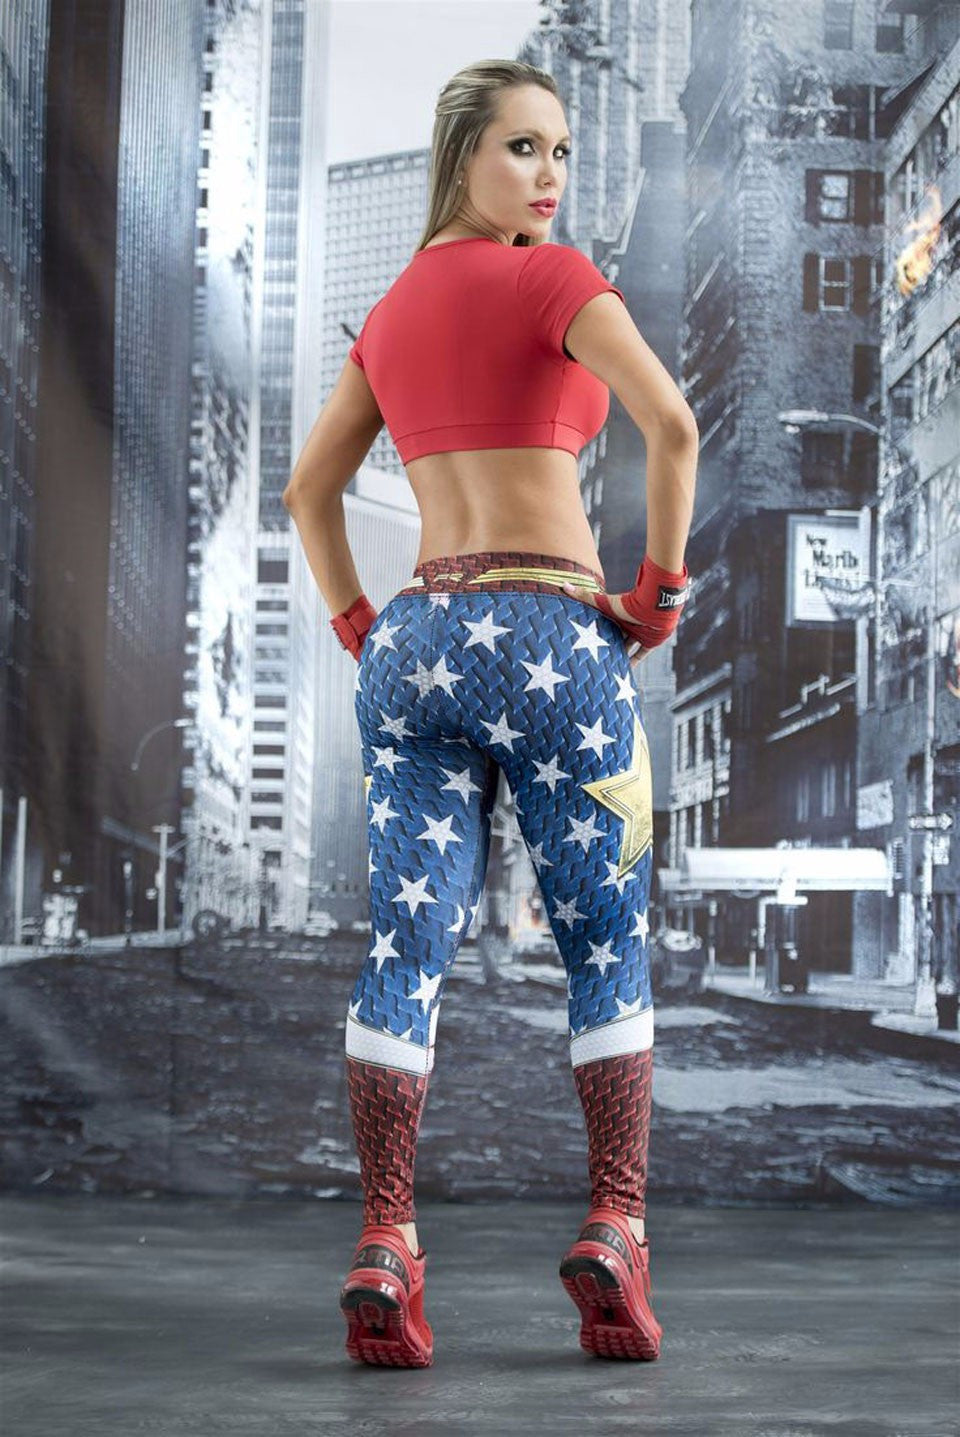 2021 Newest Buteefull Female High Pants Fitness Leggings Wonder Woman  Stretch Pants Exercise Workout Clothes